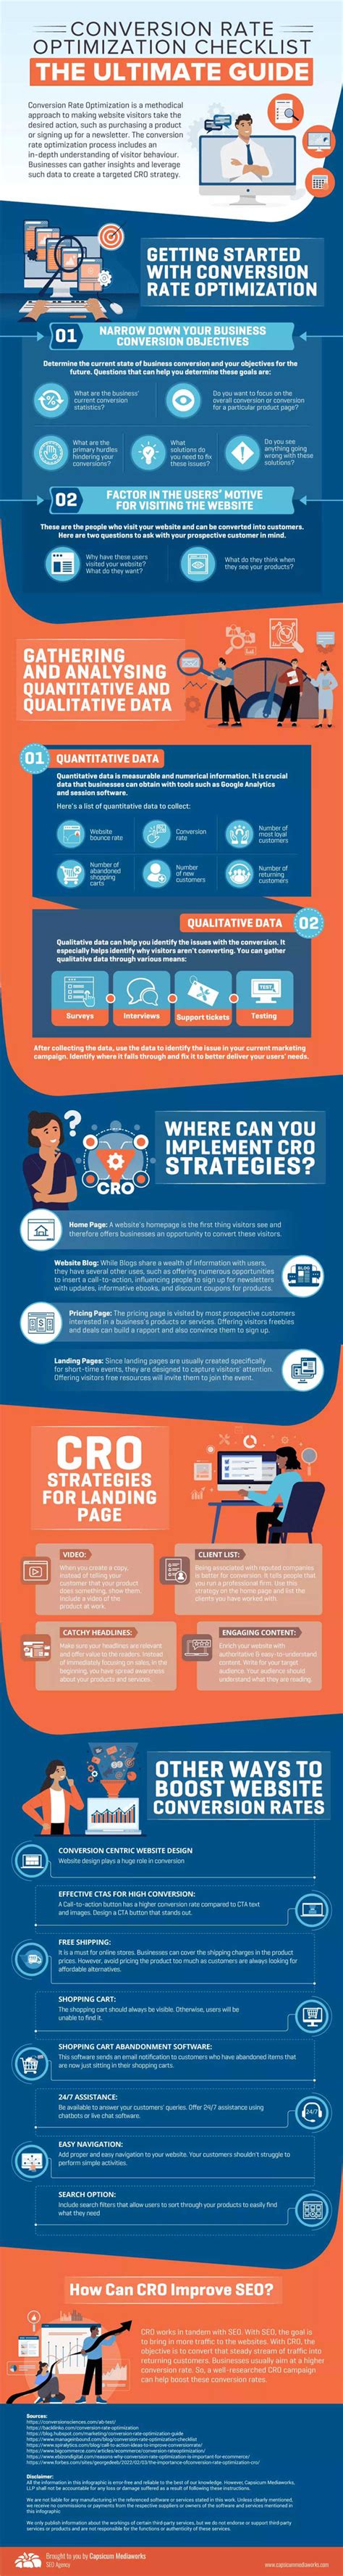 The Ultimate Guide To Conversion Rate Optimization Infographic The Agencylogic Blogthe